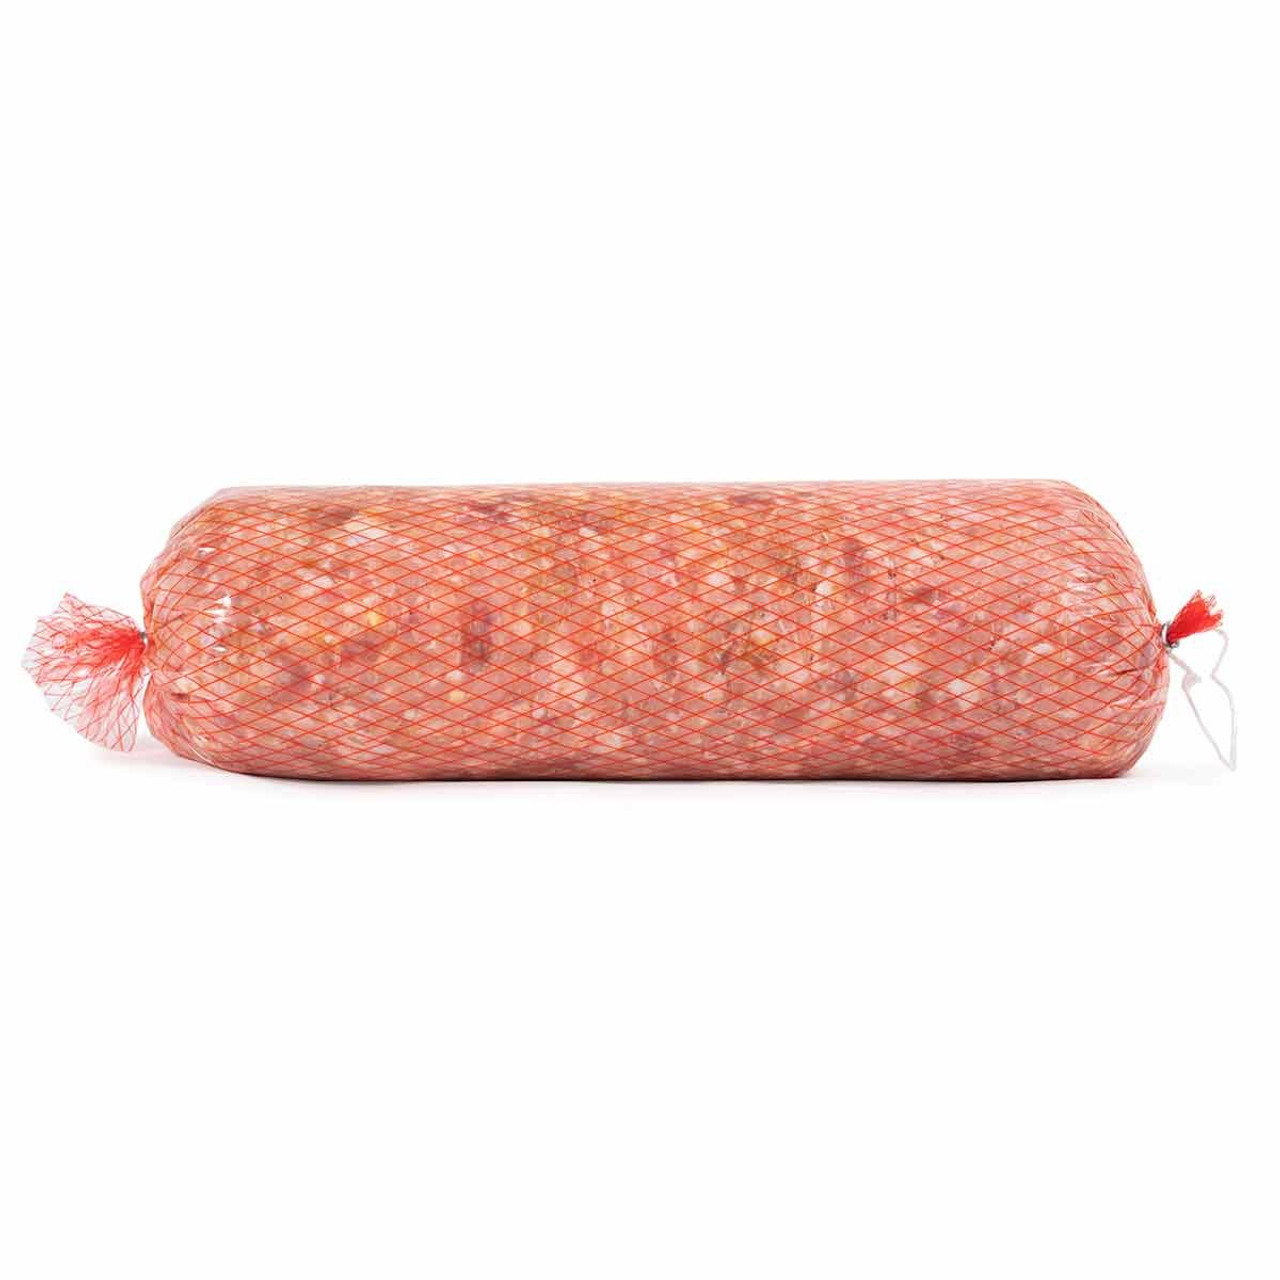 Meat Chub Bags (1 Lb, Ground Beef - Red Plaid)